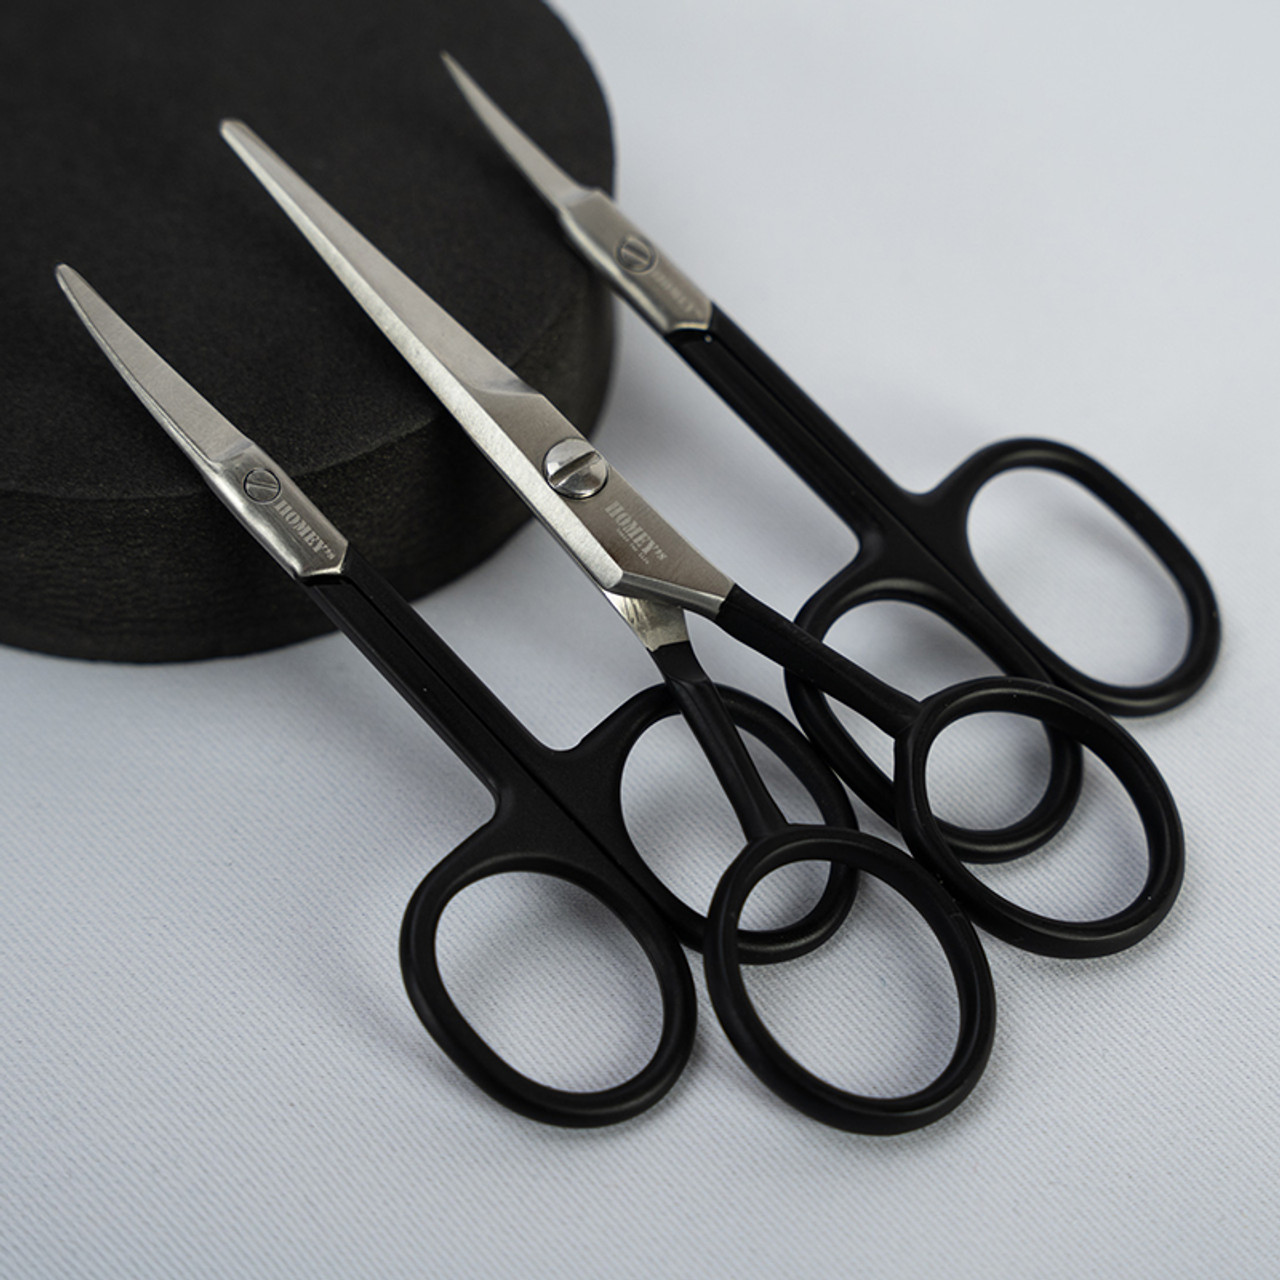 Homey's Nail Scissors - Curved Tip